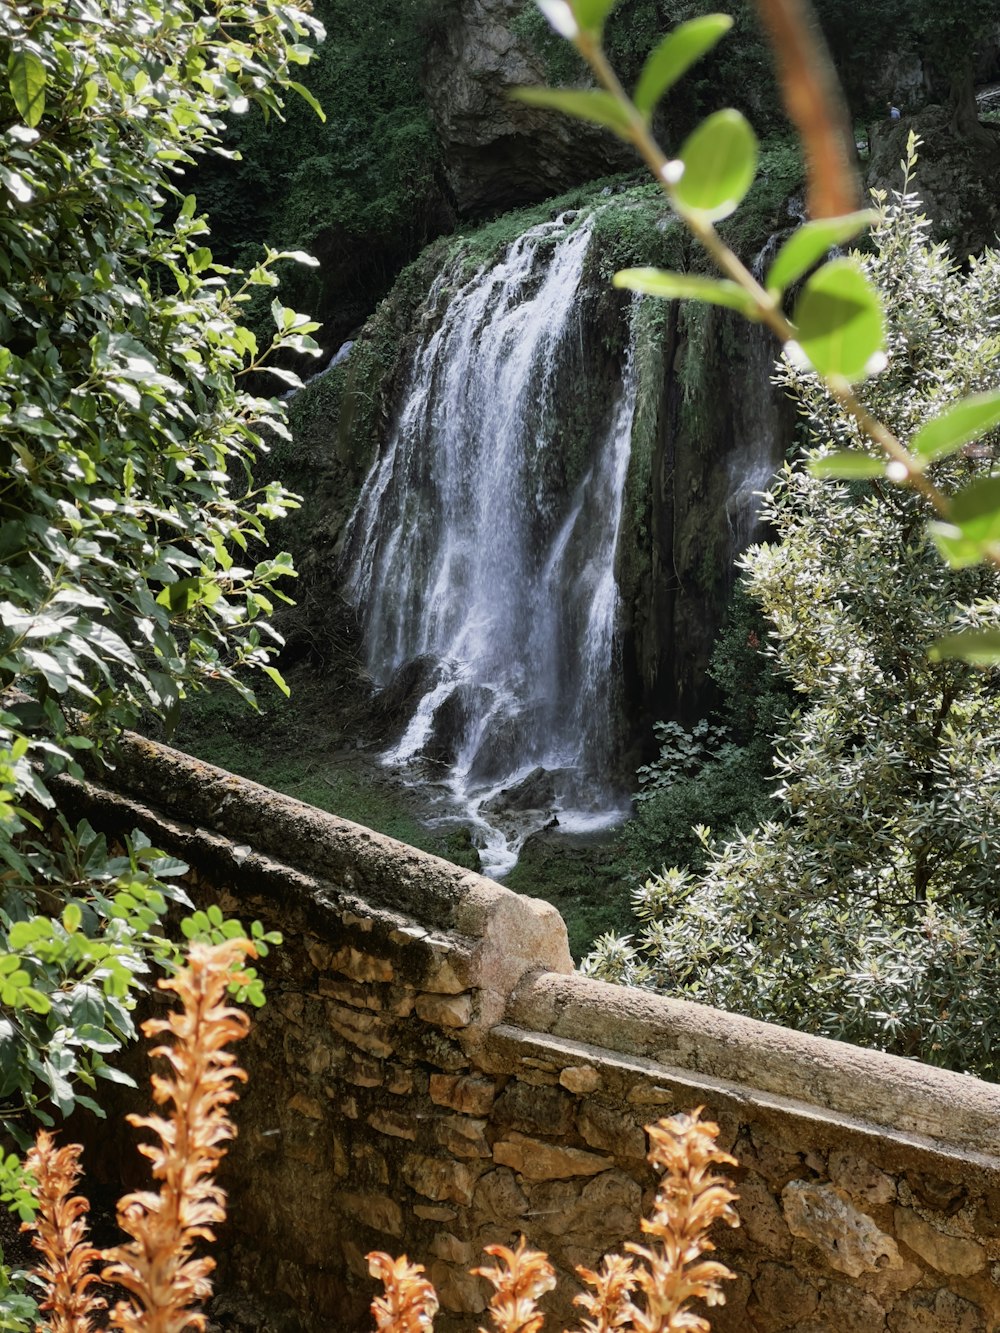 a view of a waterfall from behind a stone wall